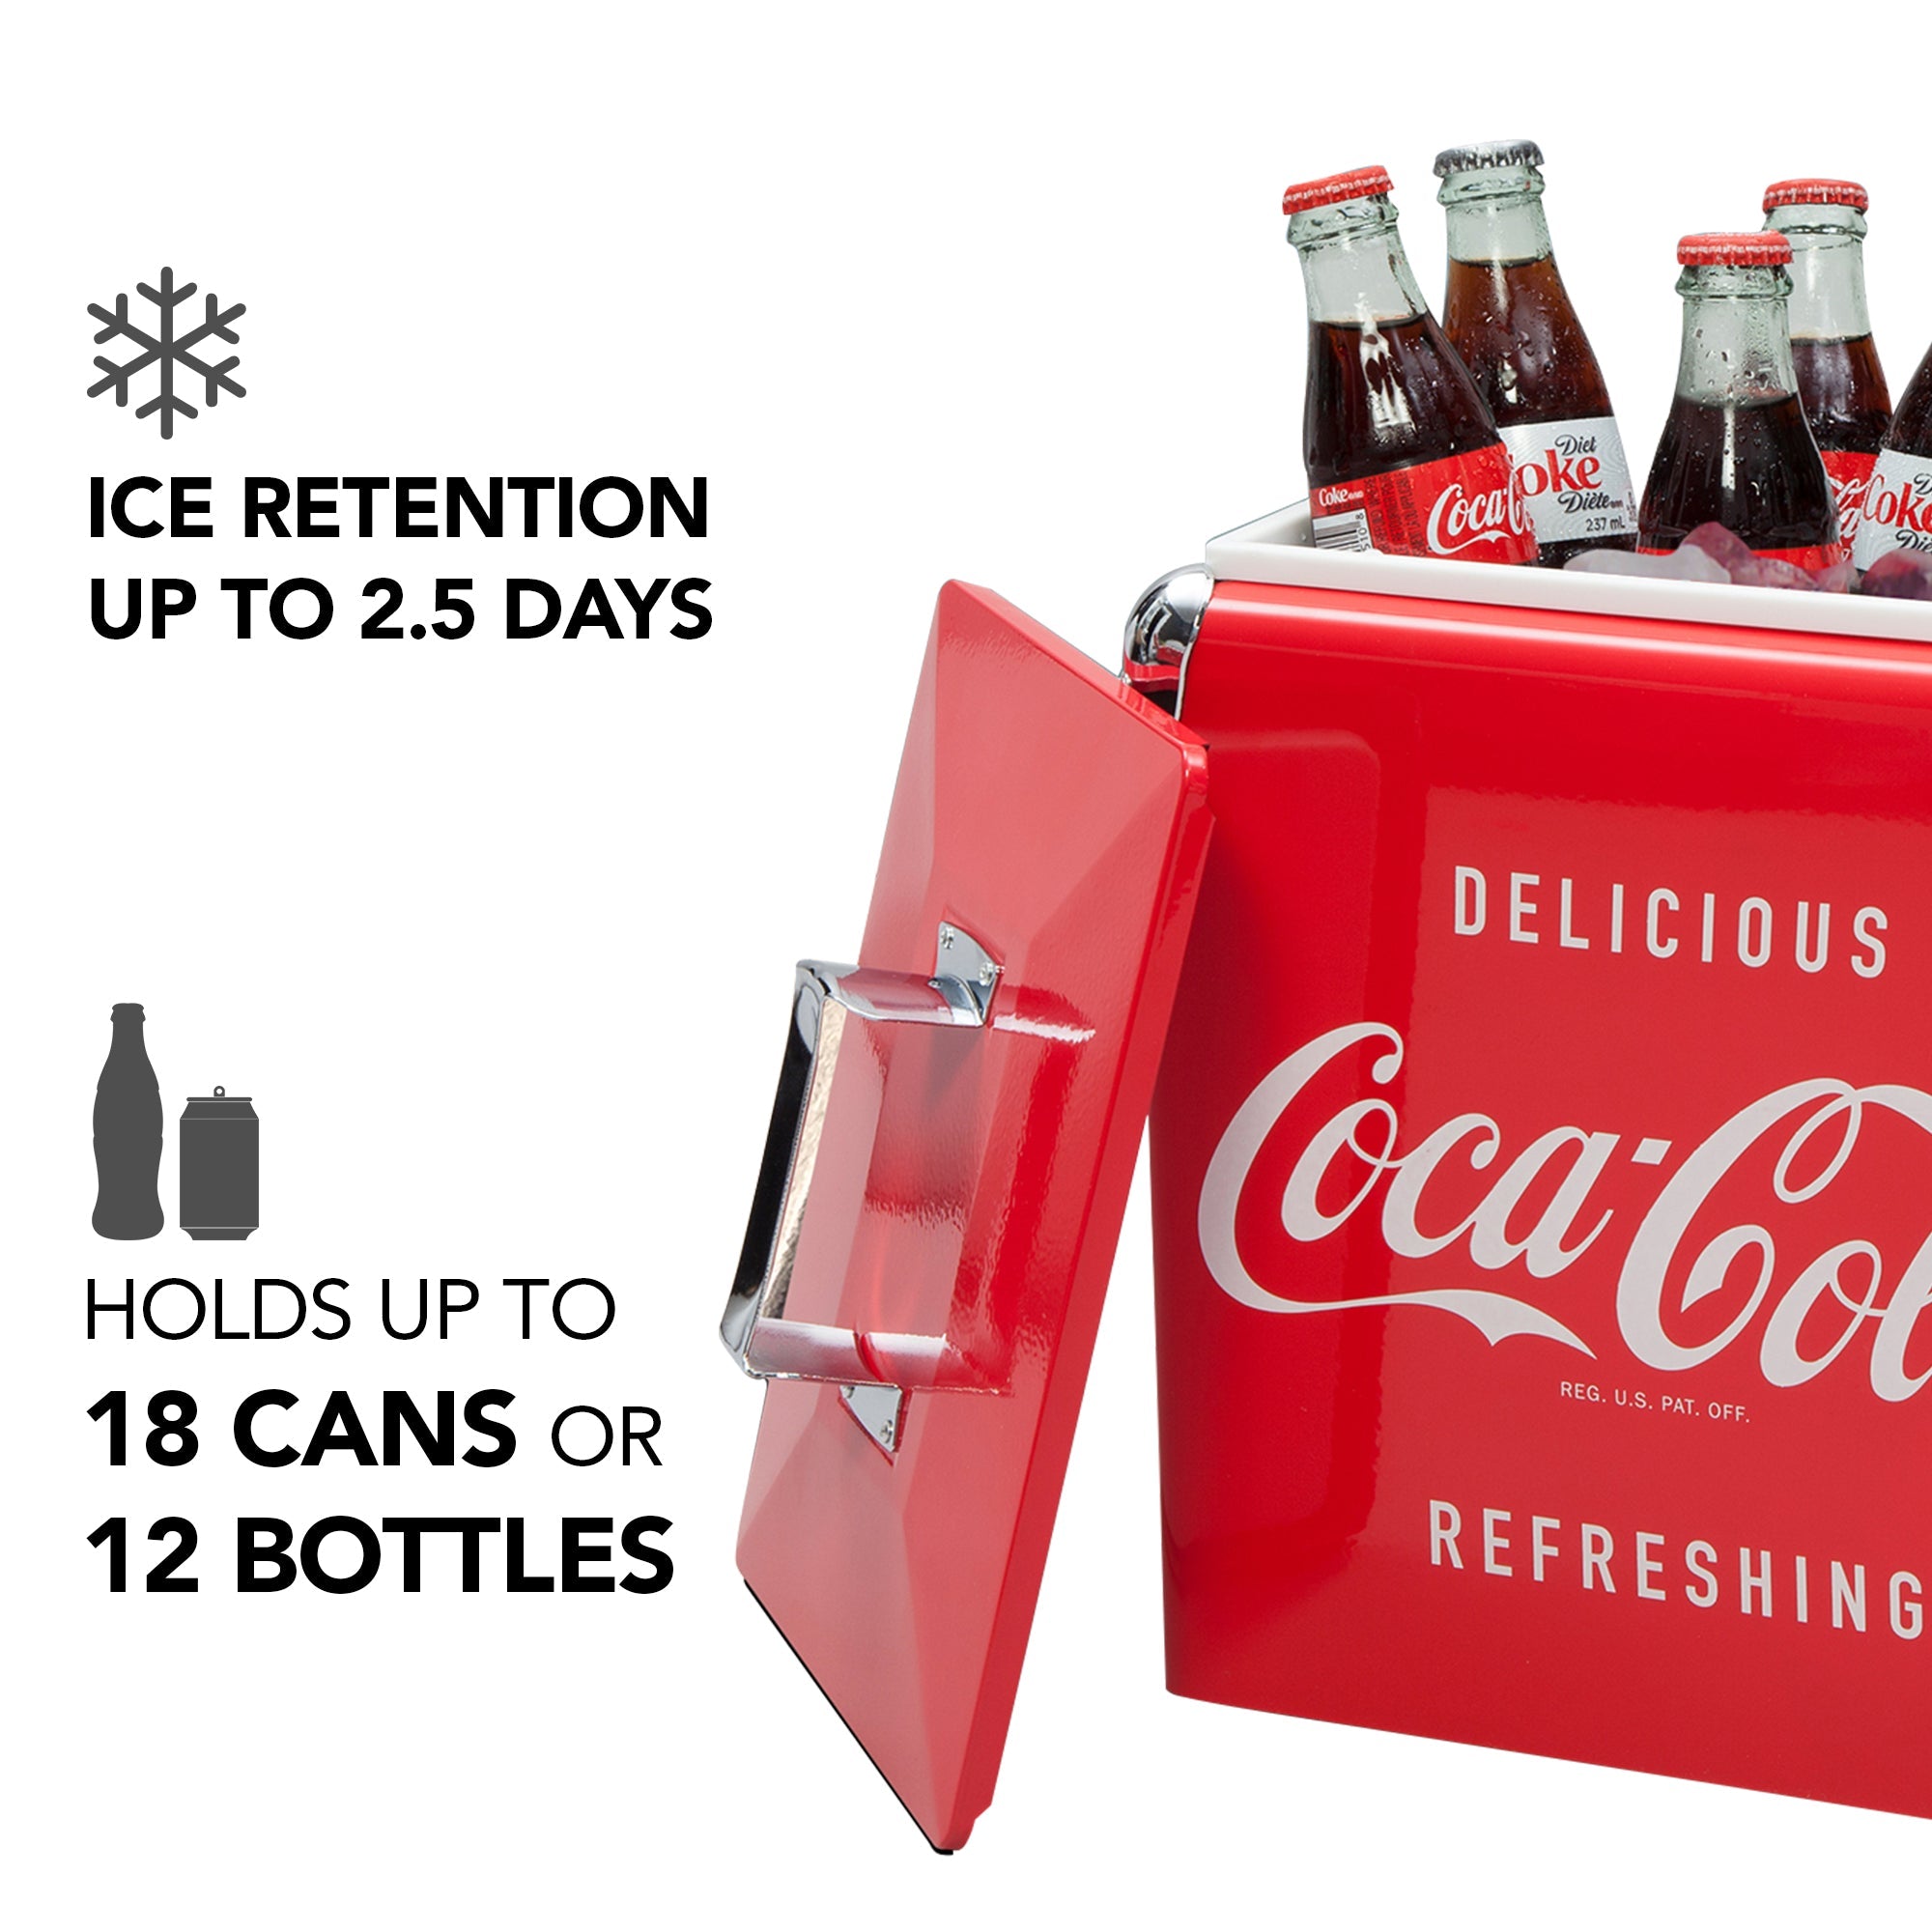 Product shot of Coca-Cola 13L retro ice chest, open with ice and glass bottles of Coke and Diet Coke inside and the lid leaning against it, on a white background. Text and icons to the left describe: Ice retention up to 2.5 days; holds up to 18 cans or 12 bottles